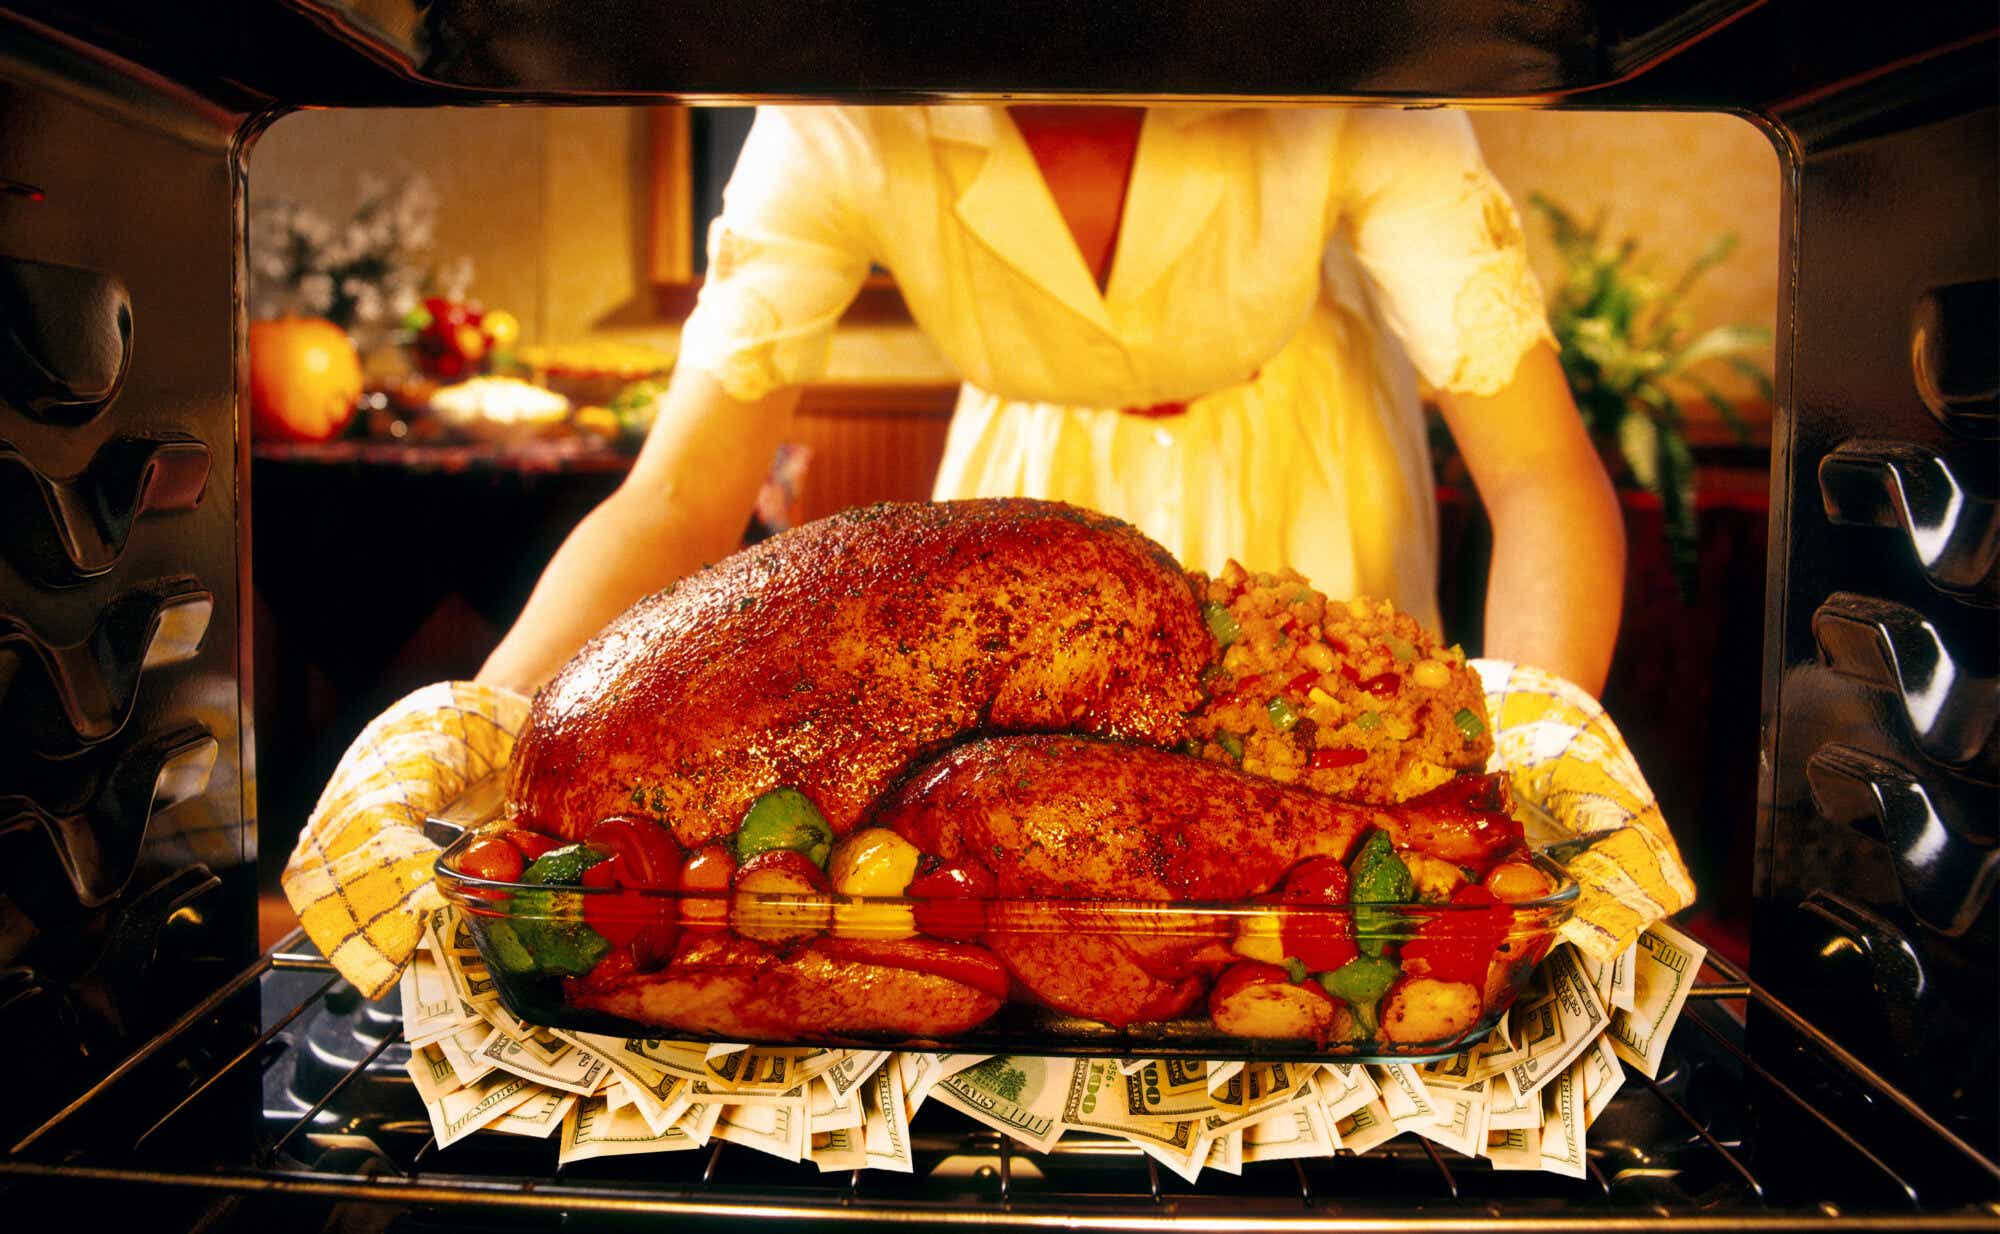 Picture of roasted Thanksgiving turkey atop piles of $100 bills coming out of an oven.